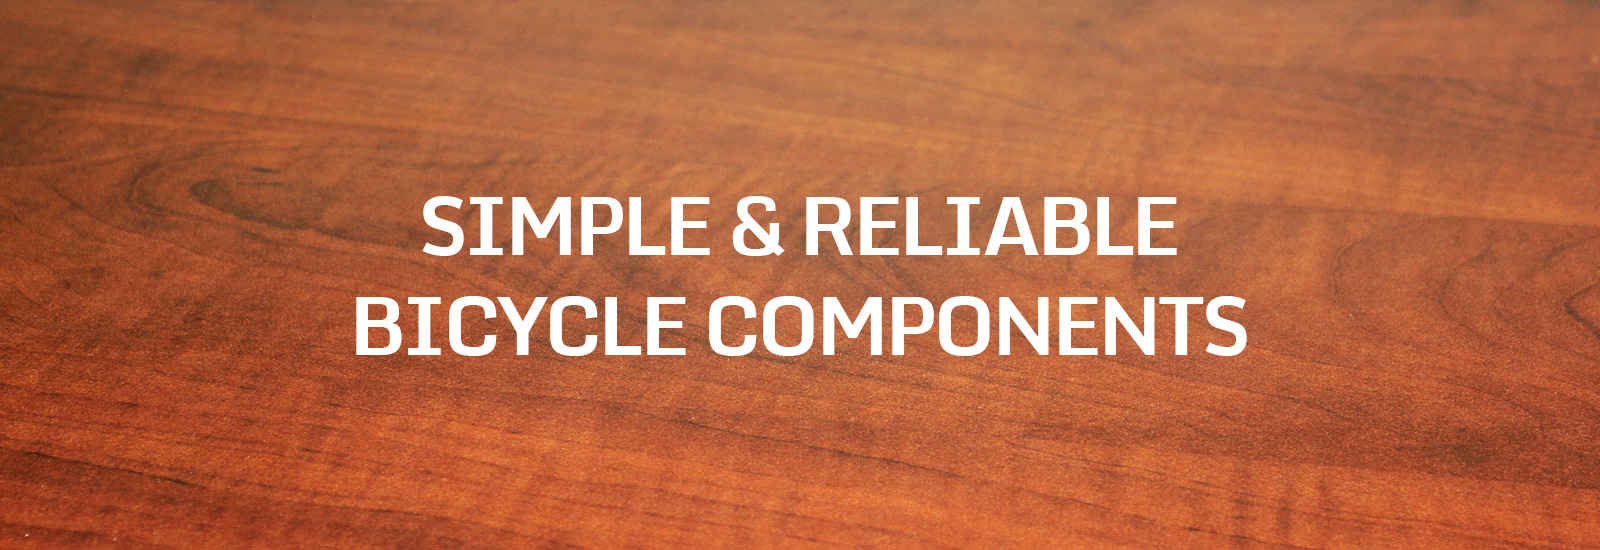 Simple & Reliable Bicycle Components